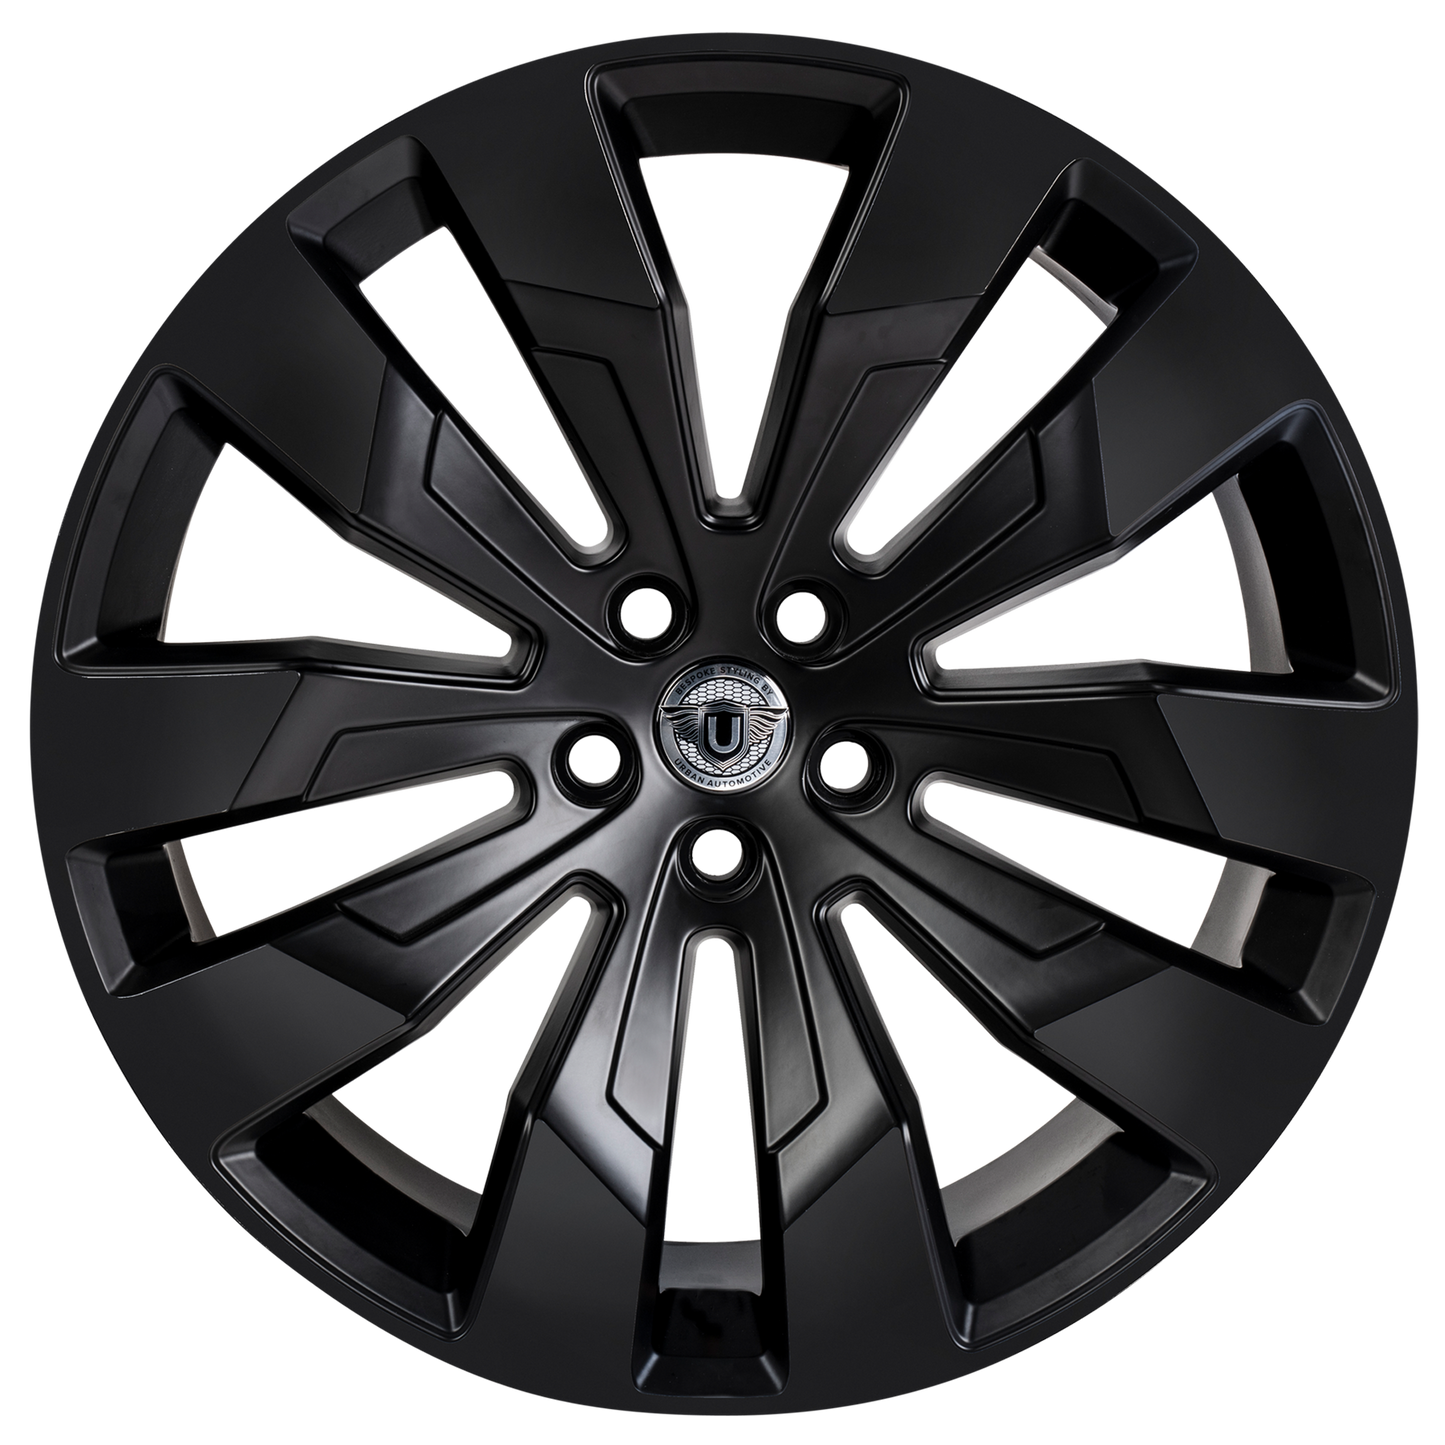 22" WX 1: 4 WHEEL Package (Staggered Setup 2 x Front , 2 x Rear), Satin Black